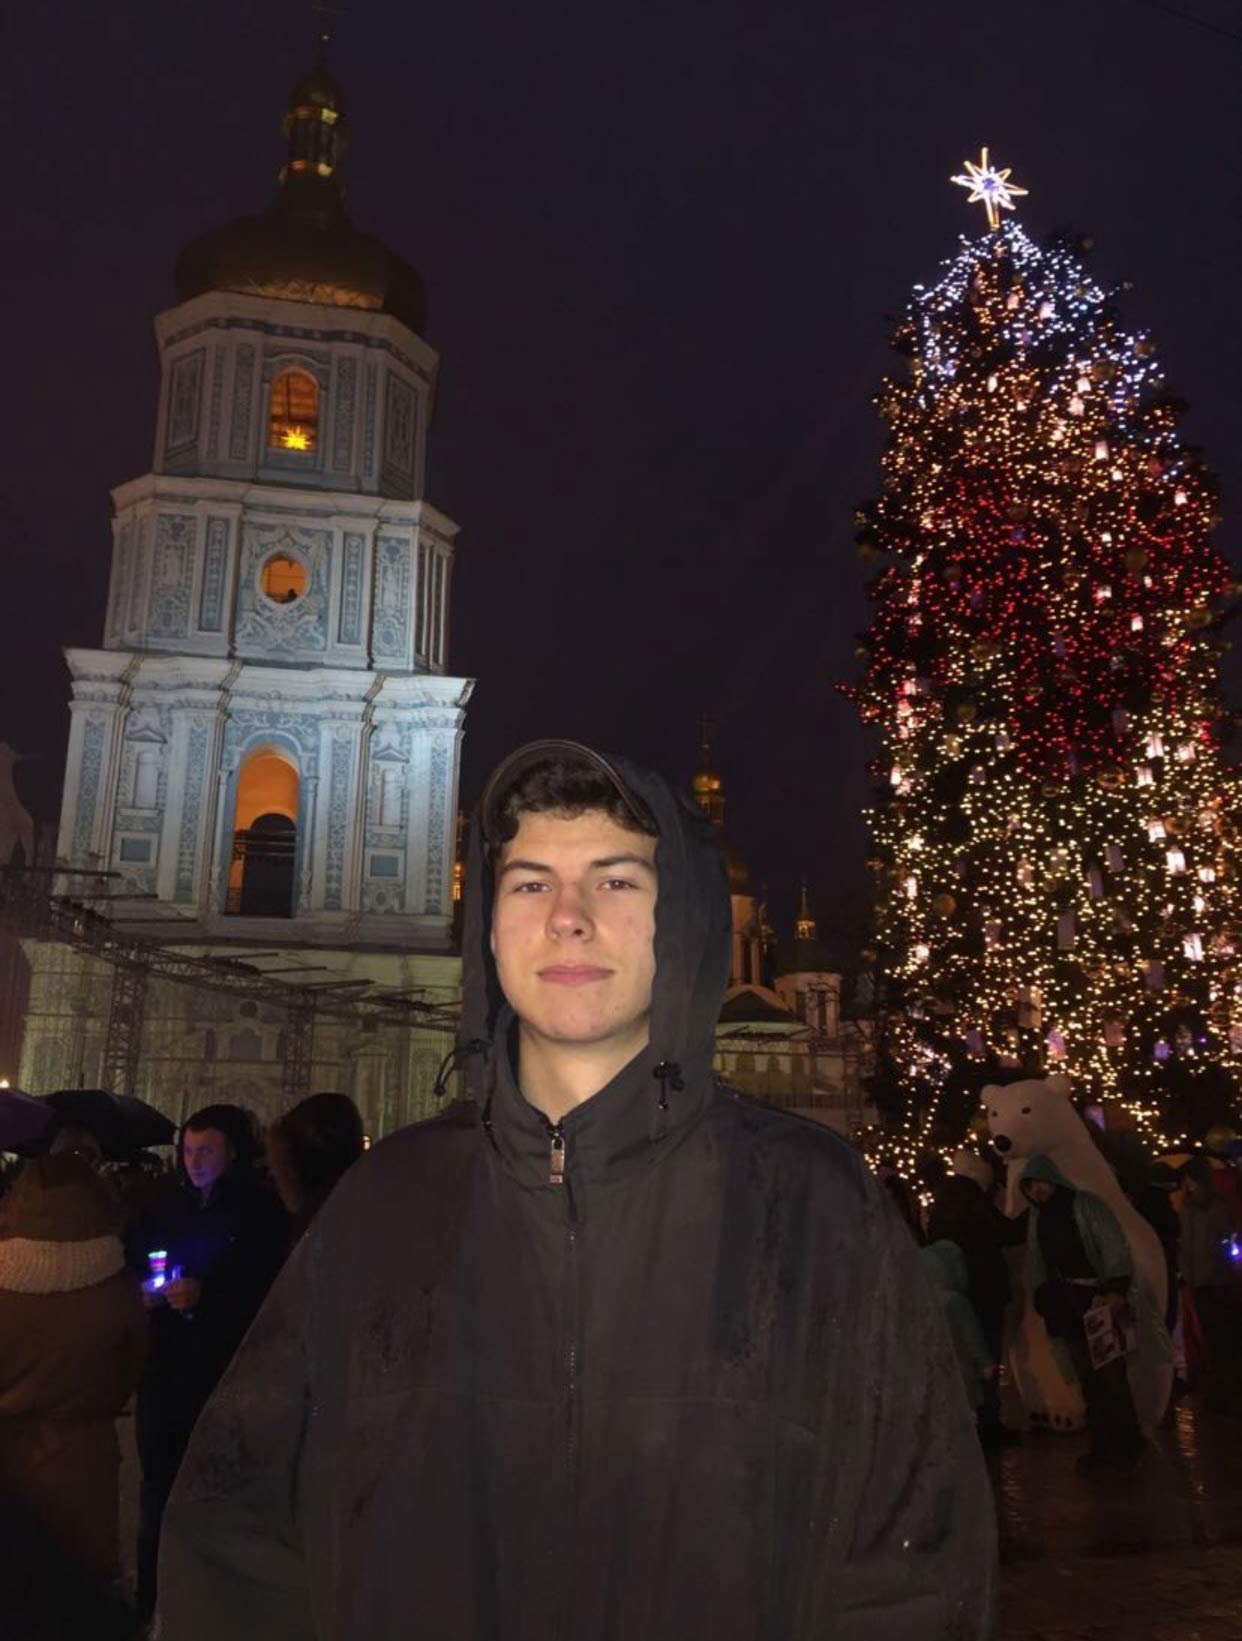 Andriy Shalkivskiy standing in front of a building and Christmas Tree in Ukraine